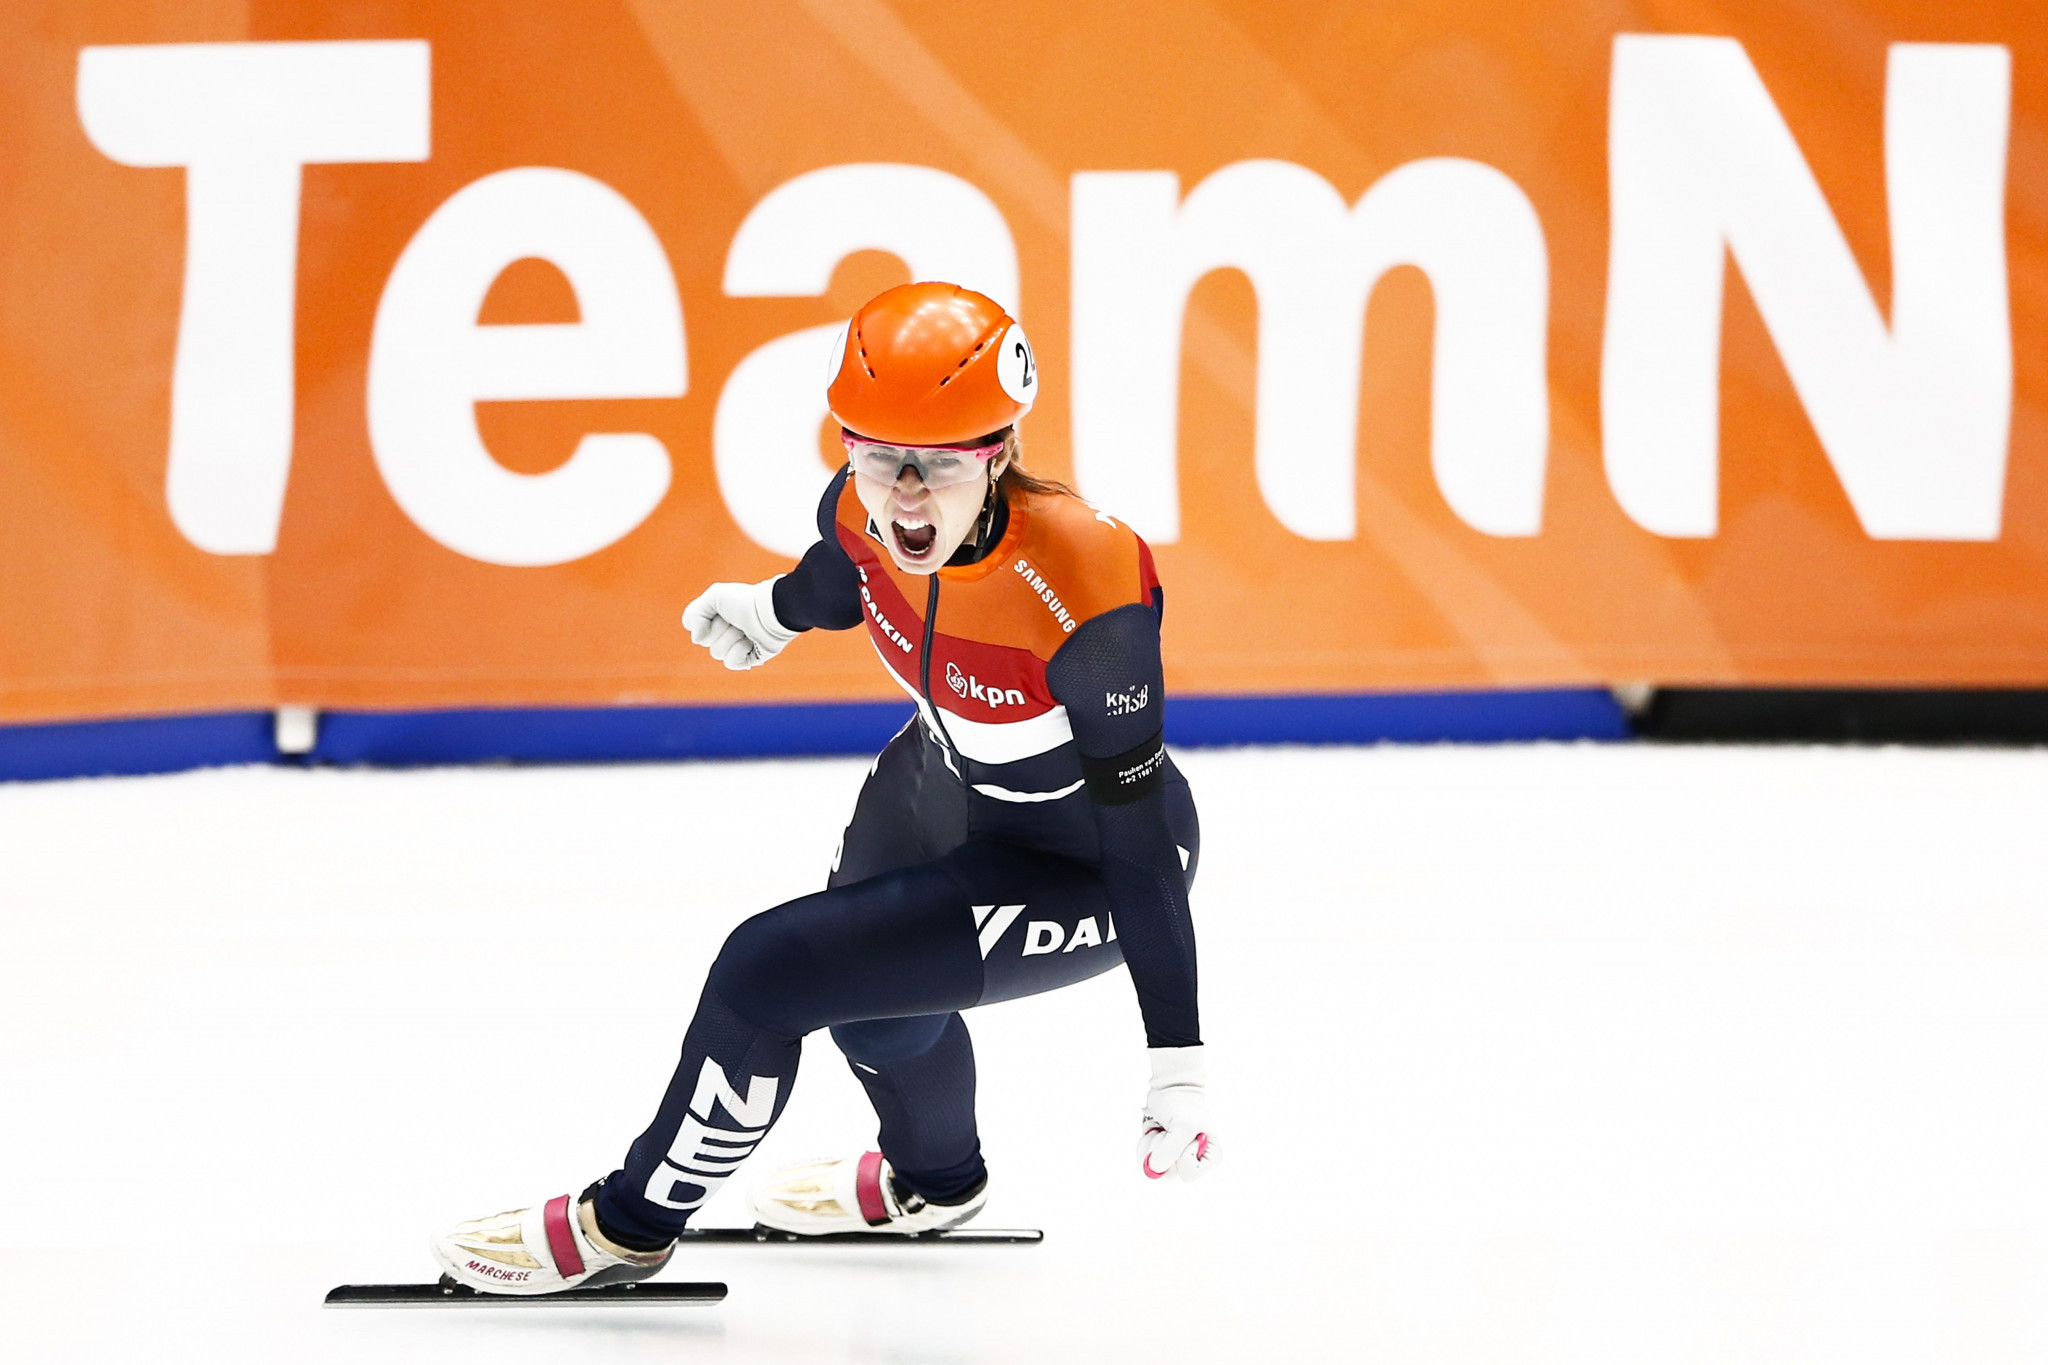 Suzanne Schulting of The Netherlands celebrates winning the women's 1,500m final at the ISU Short Track Speed Skating European Championships in front of her home crowd in Dordrecht ©ISU